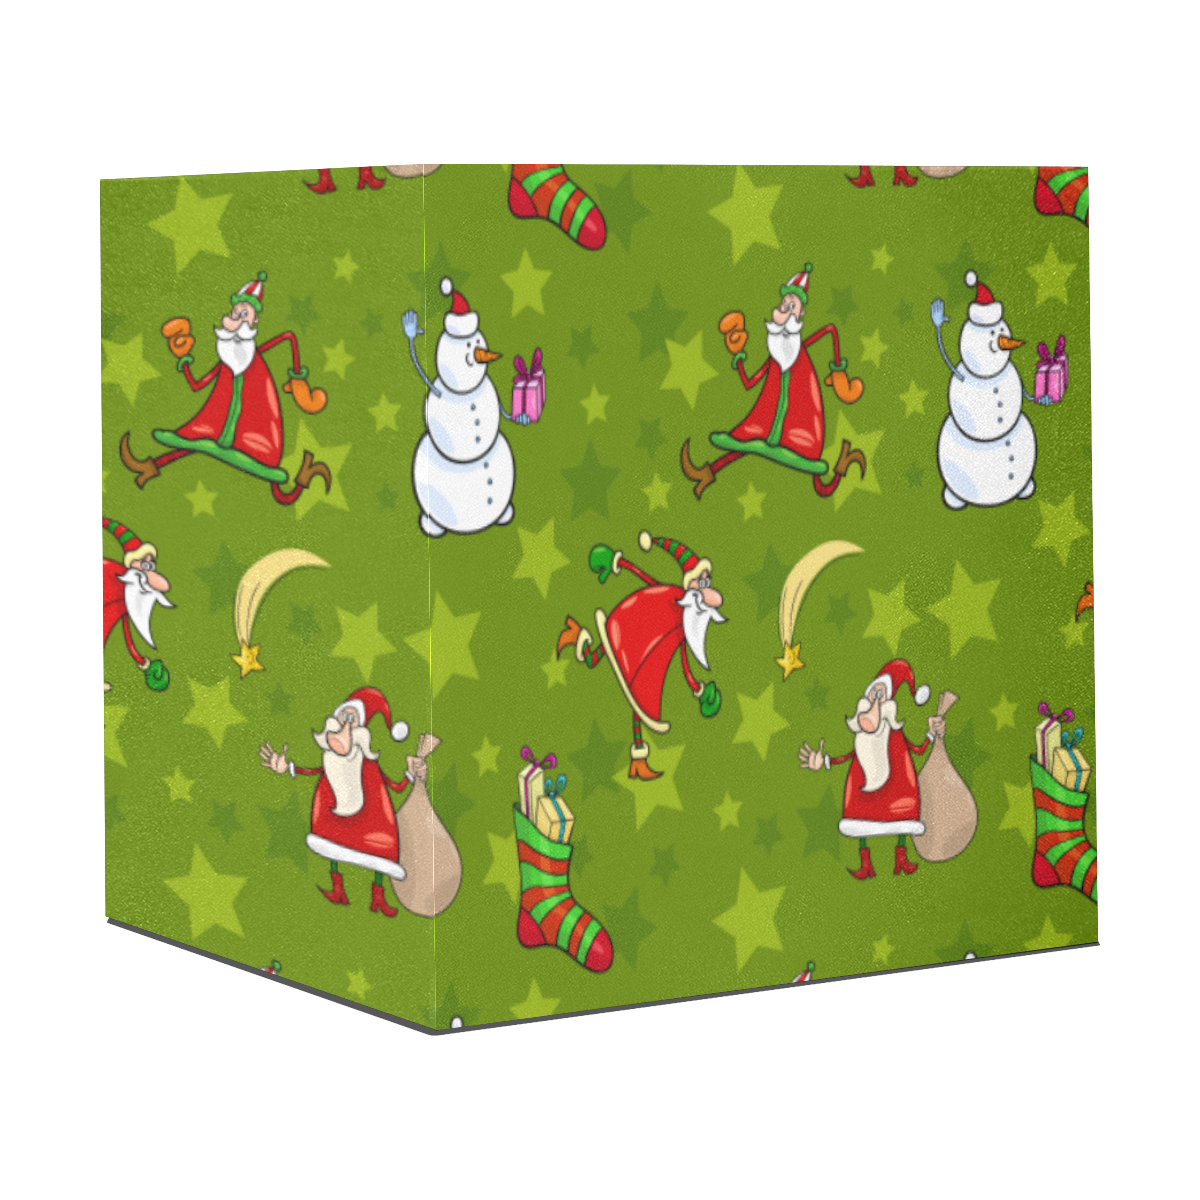 Funny Christmas Santa Claus Snowman Pattern Gift Wrapping Paper 58"x 23" (1 Roll)